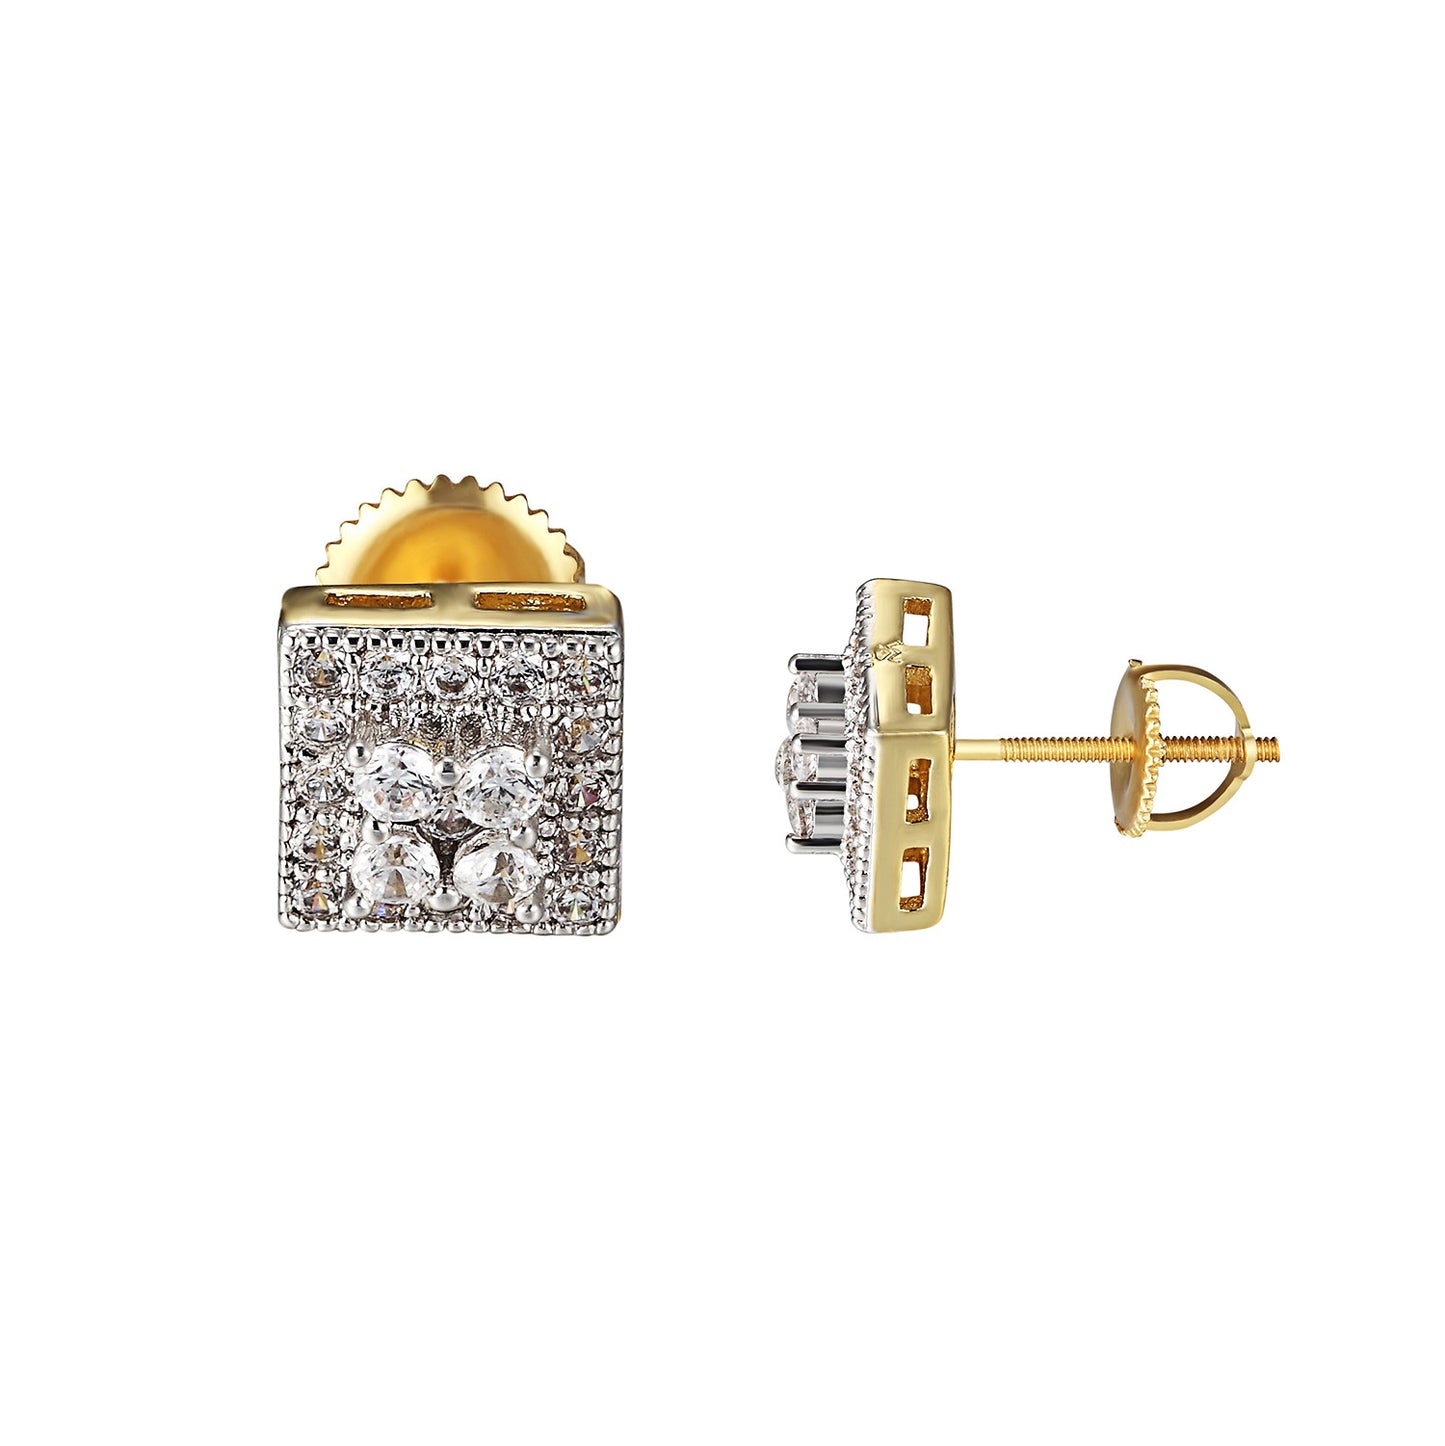 Square Face Earrings 14k Gold Finish Solitaire Round Cut Simulated Diamond 8 MM